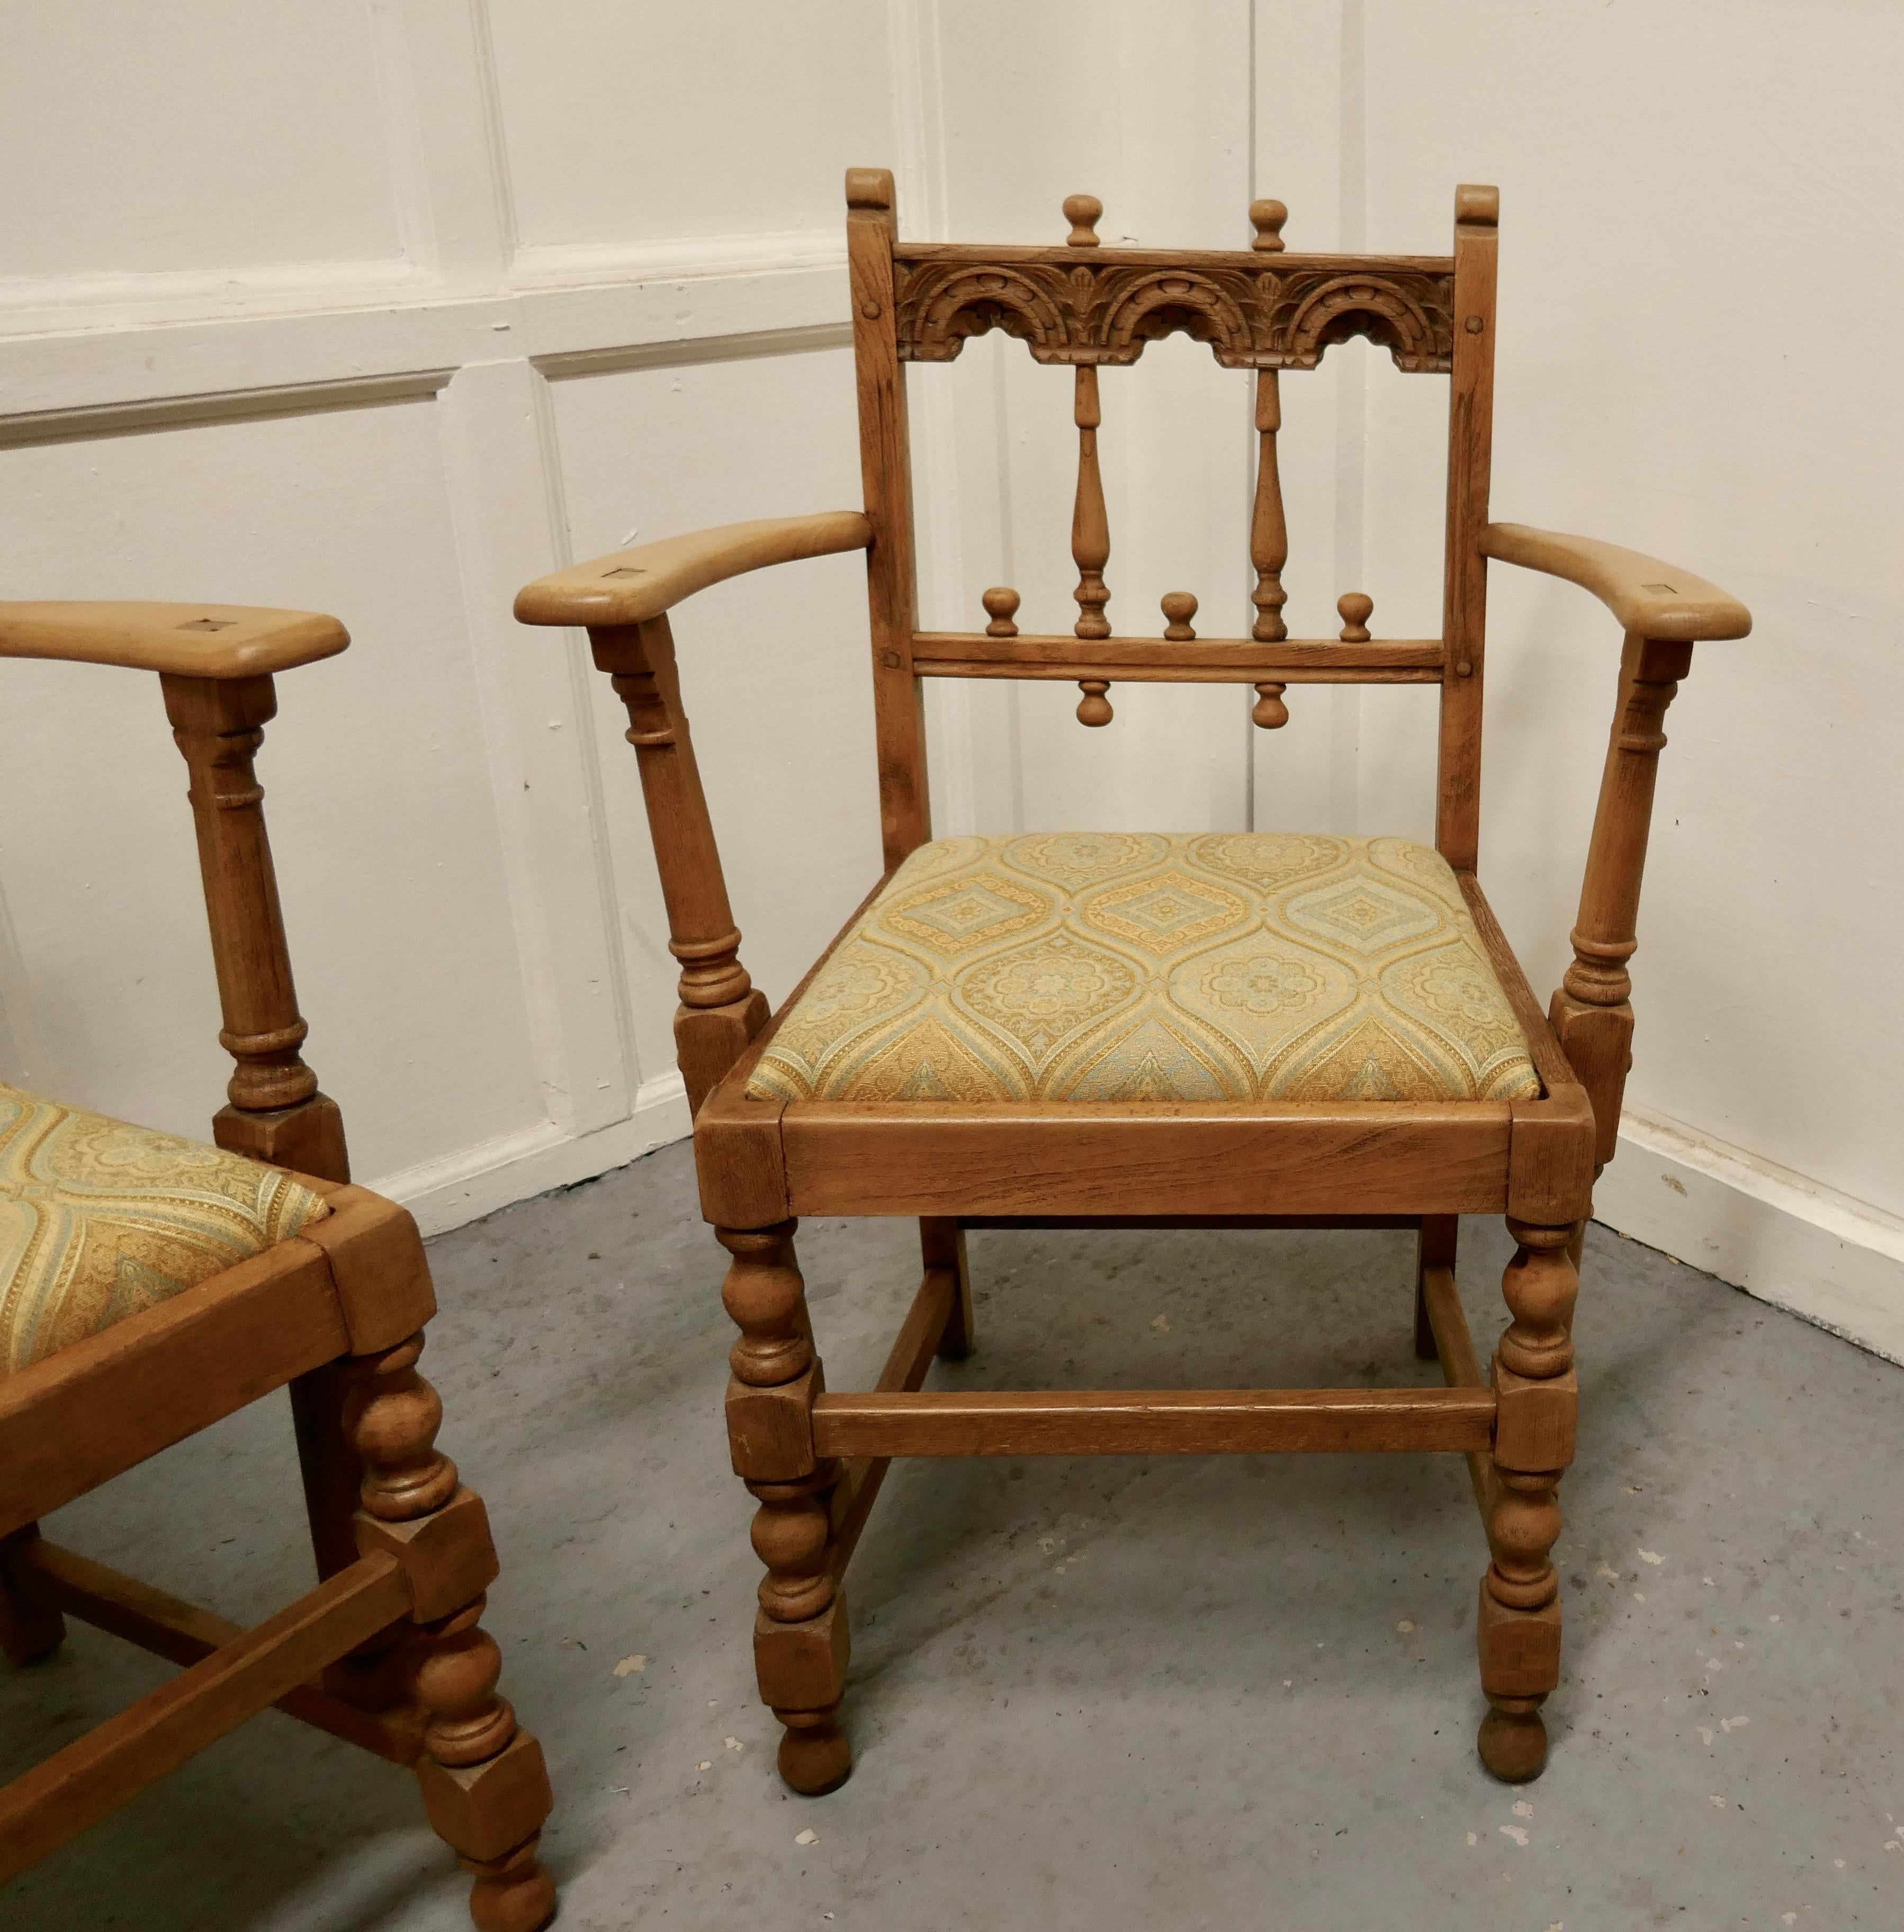 Pair of Arts & Crafts Gothic Bleached oak hall chairs

A good pair of chairs very stout and sturdy, the oak is bleached with age and the upholstery is good 
The chairs are 34” high, 25” wide and 18” deep
TGB406.